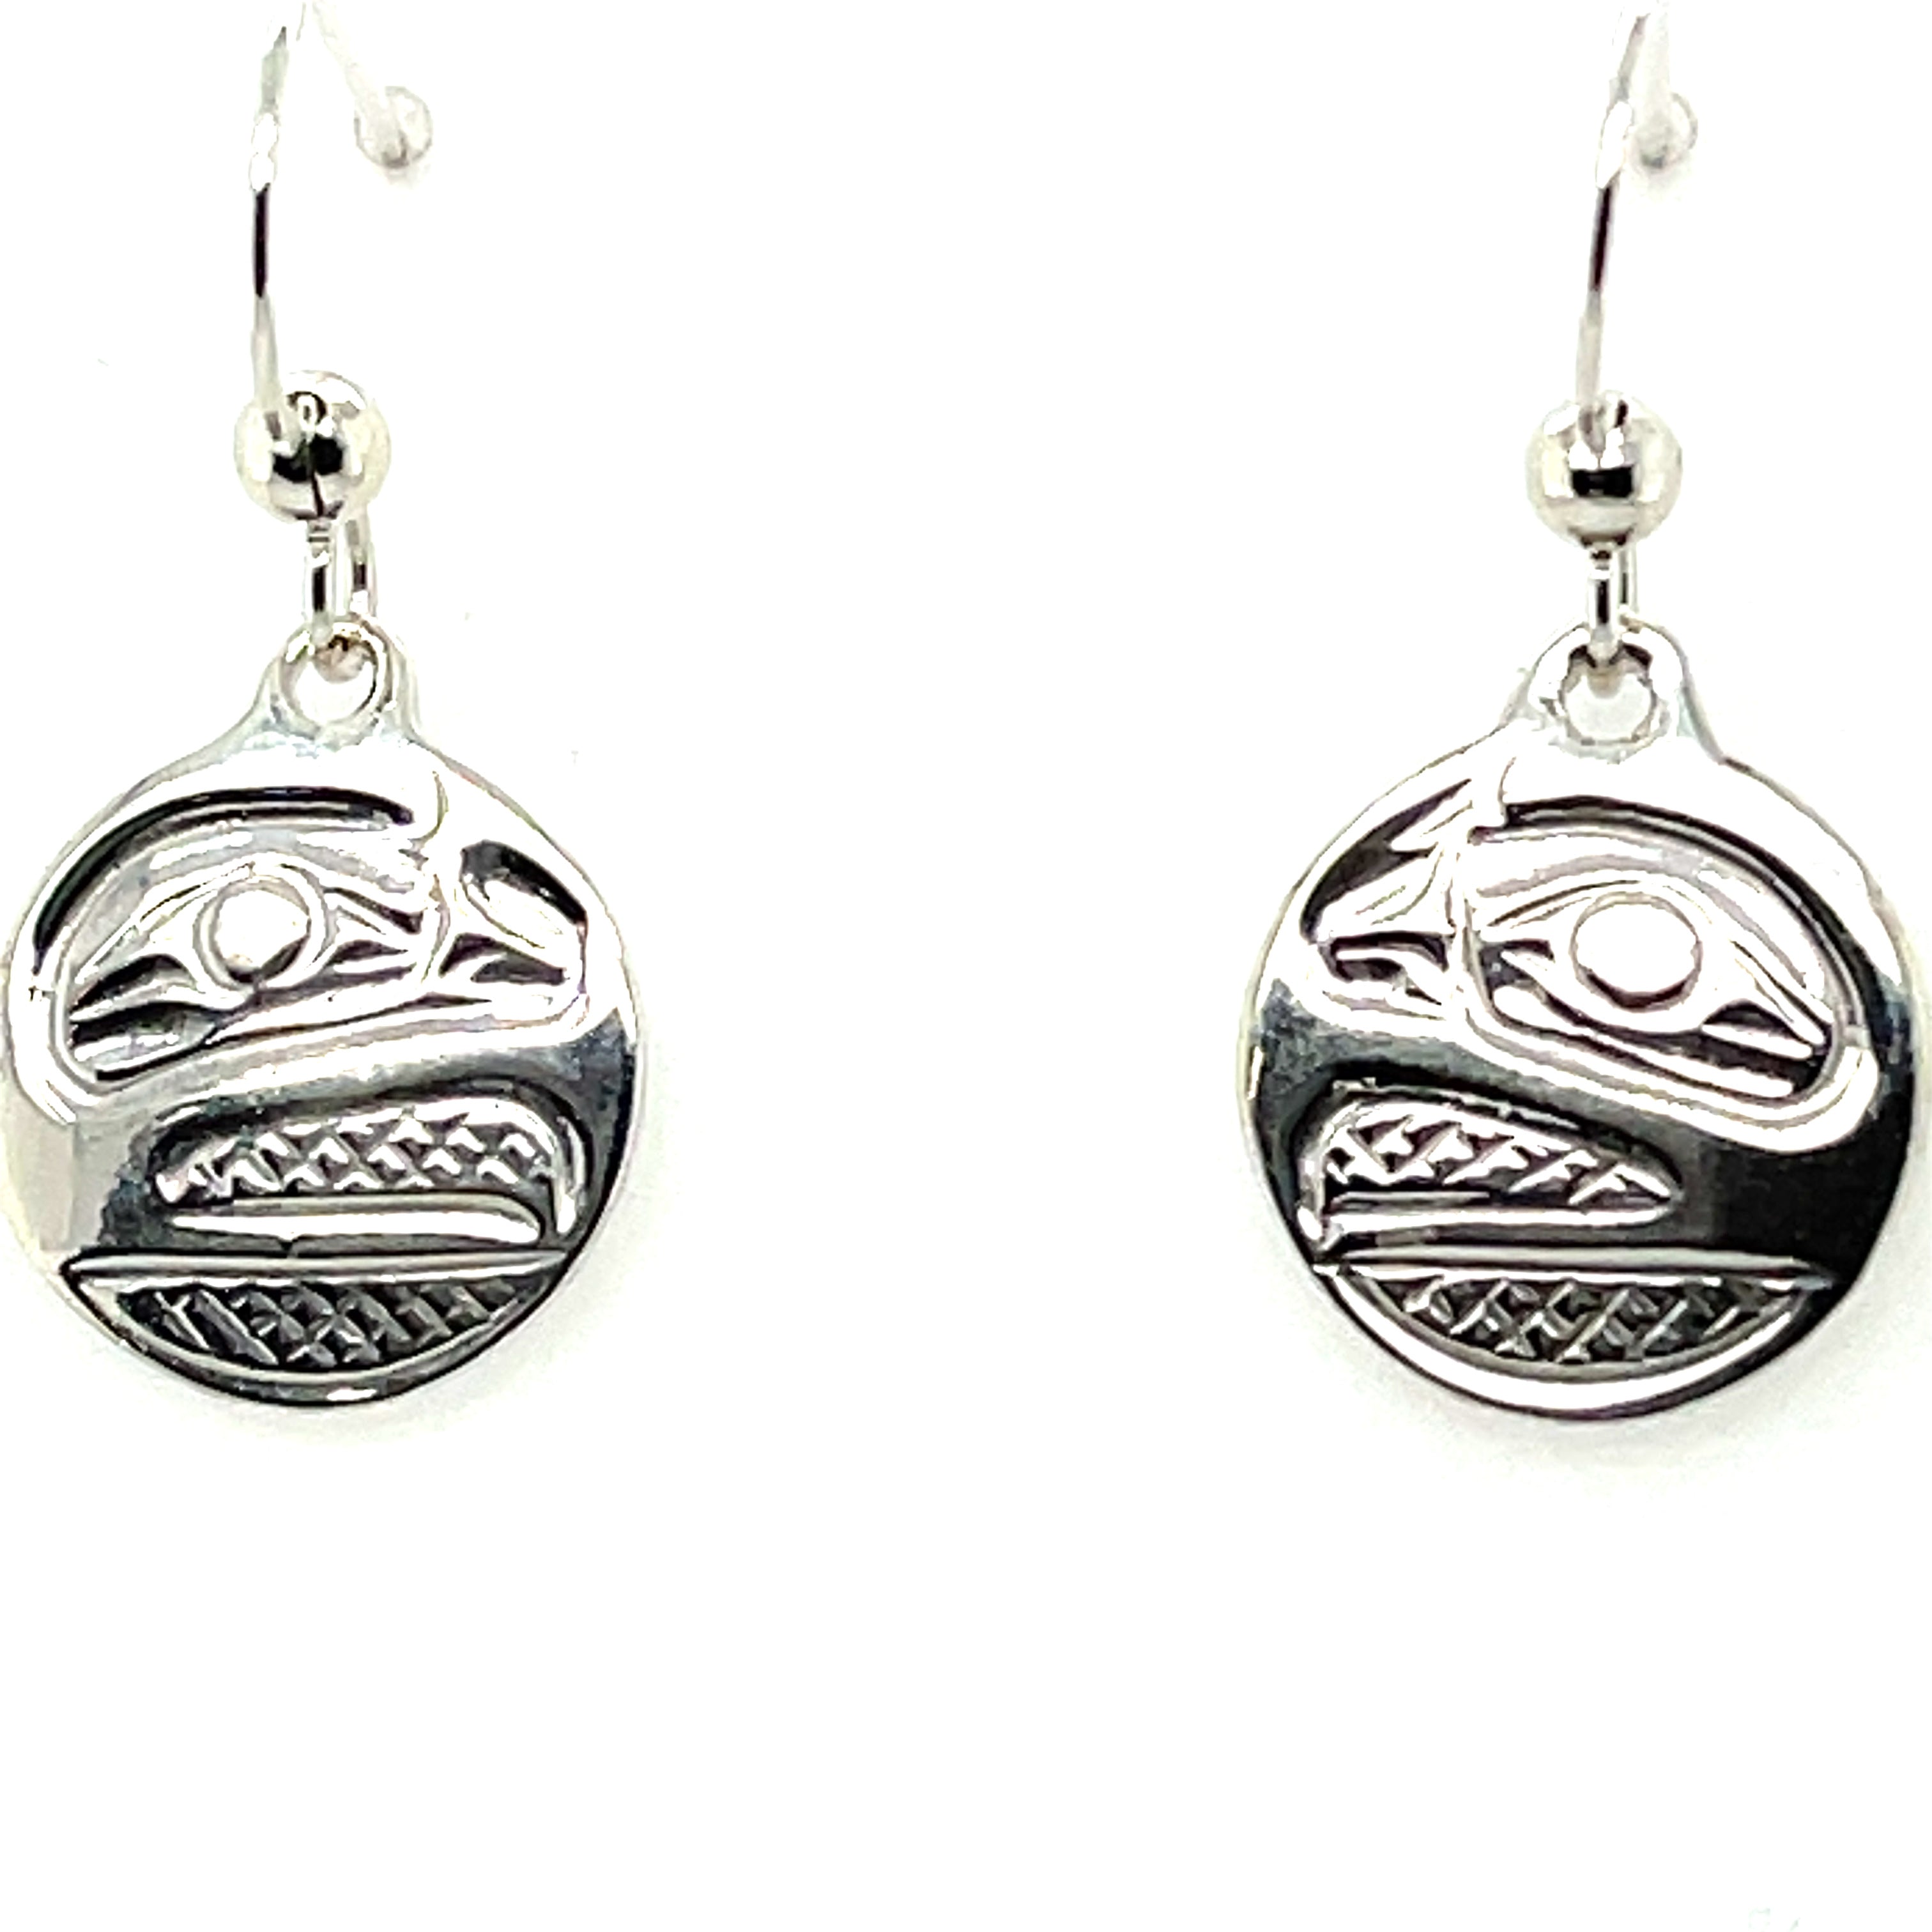 Earrings - Sterling Silver - Drop - Small - Round - Raven